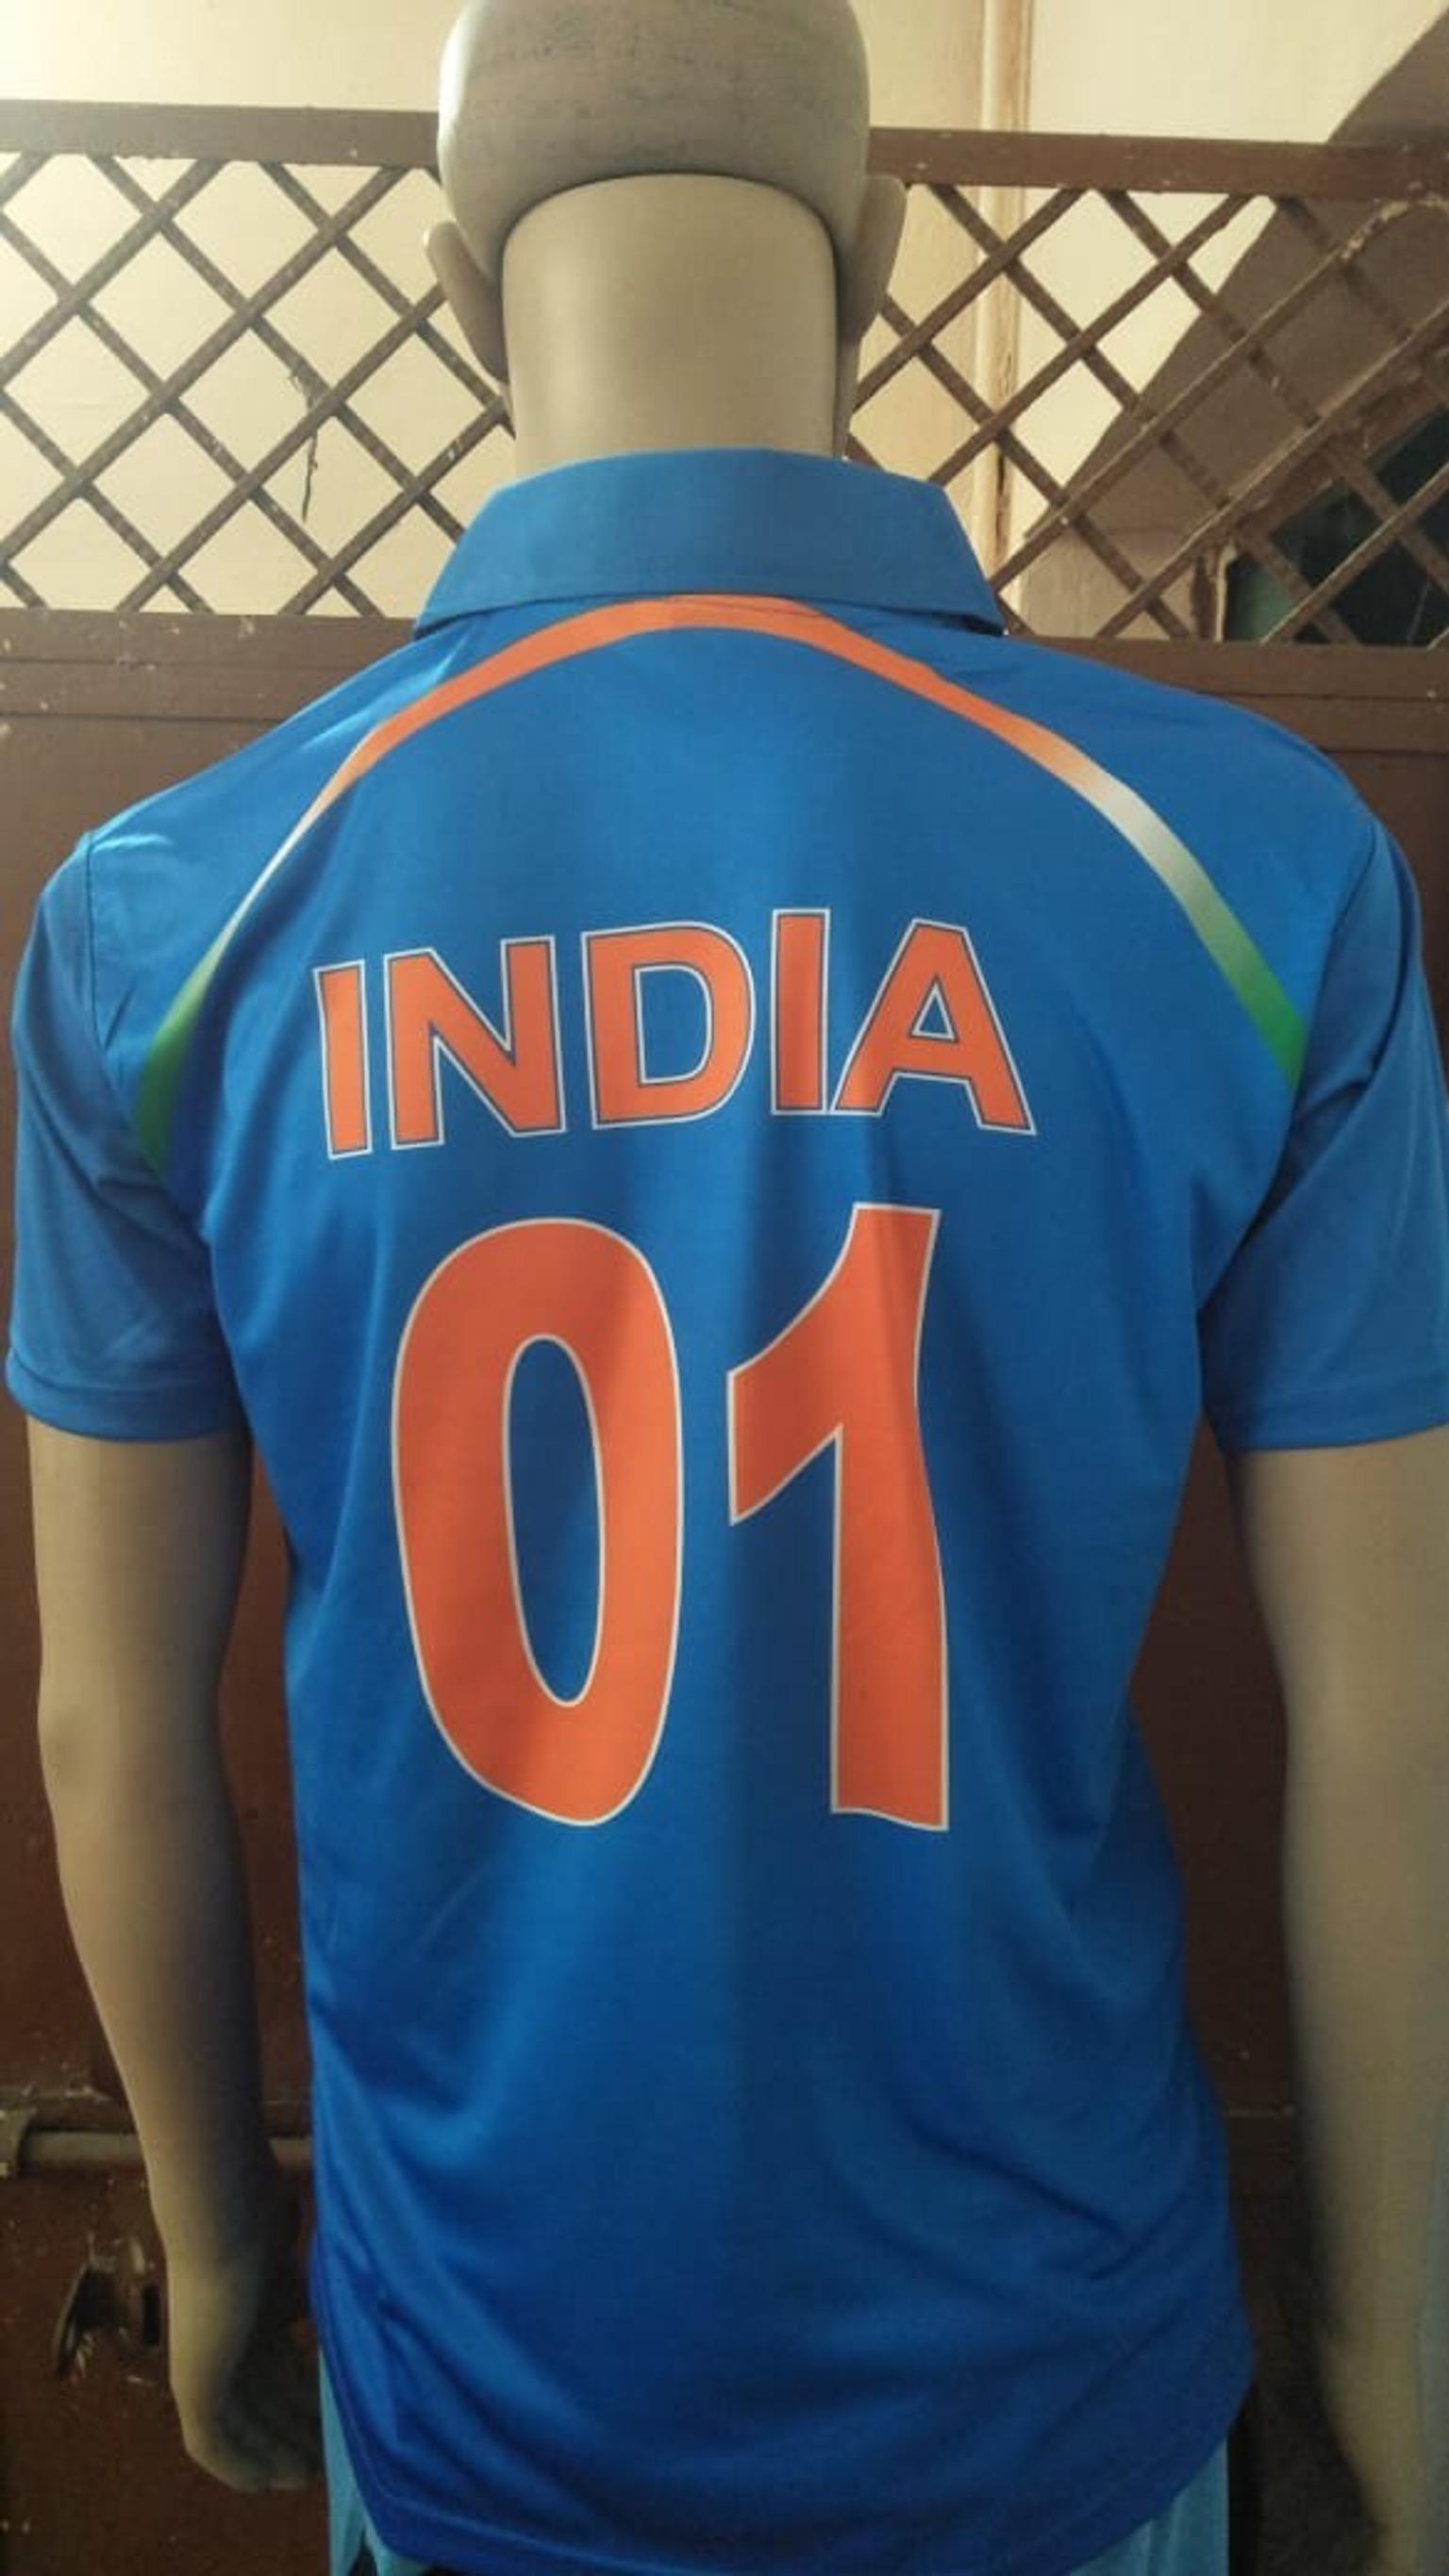 01 jersey number in cricket